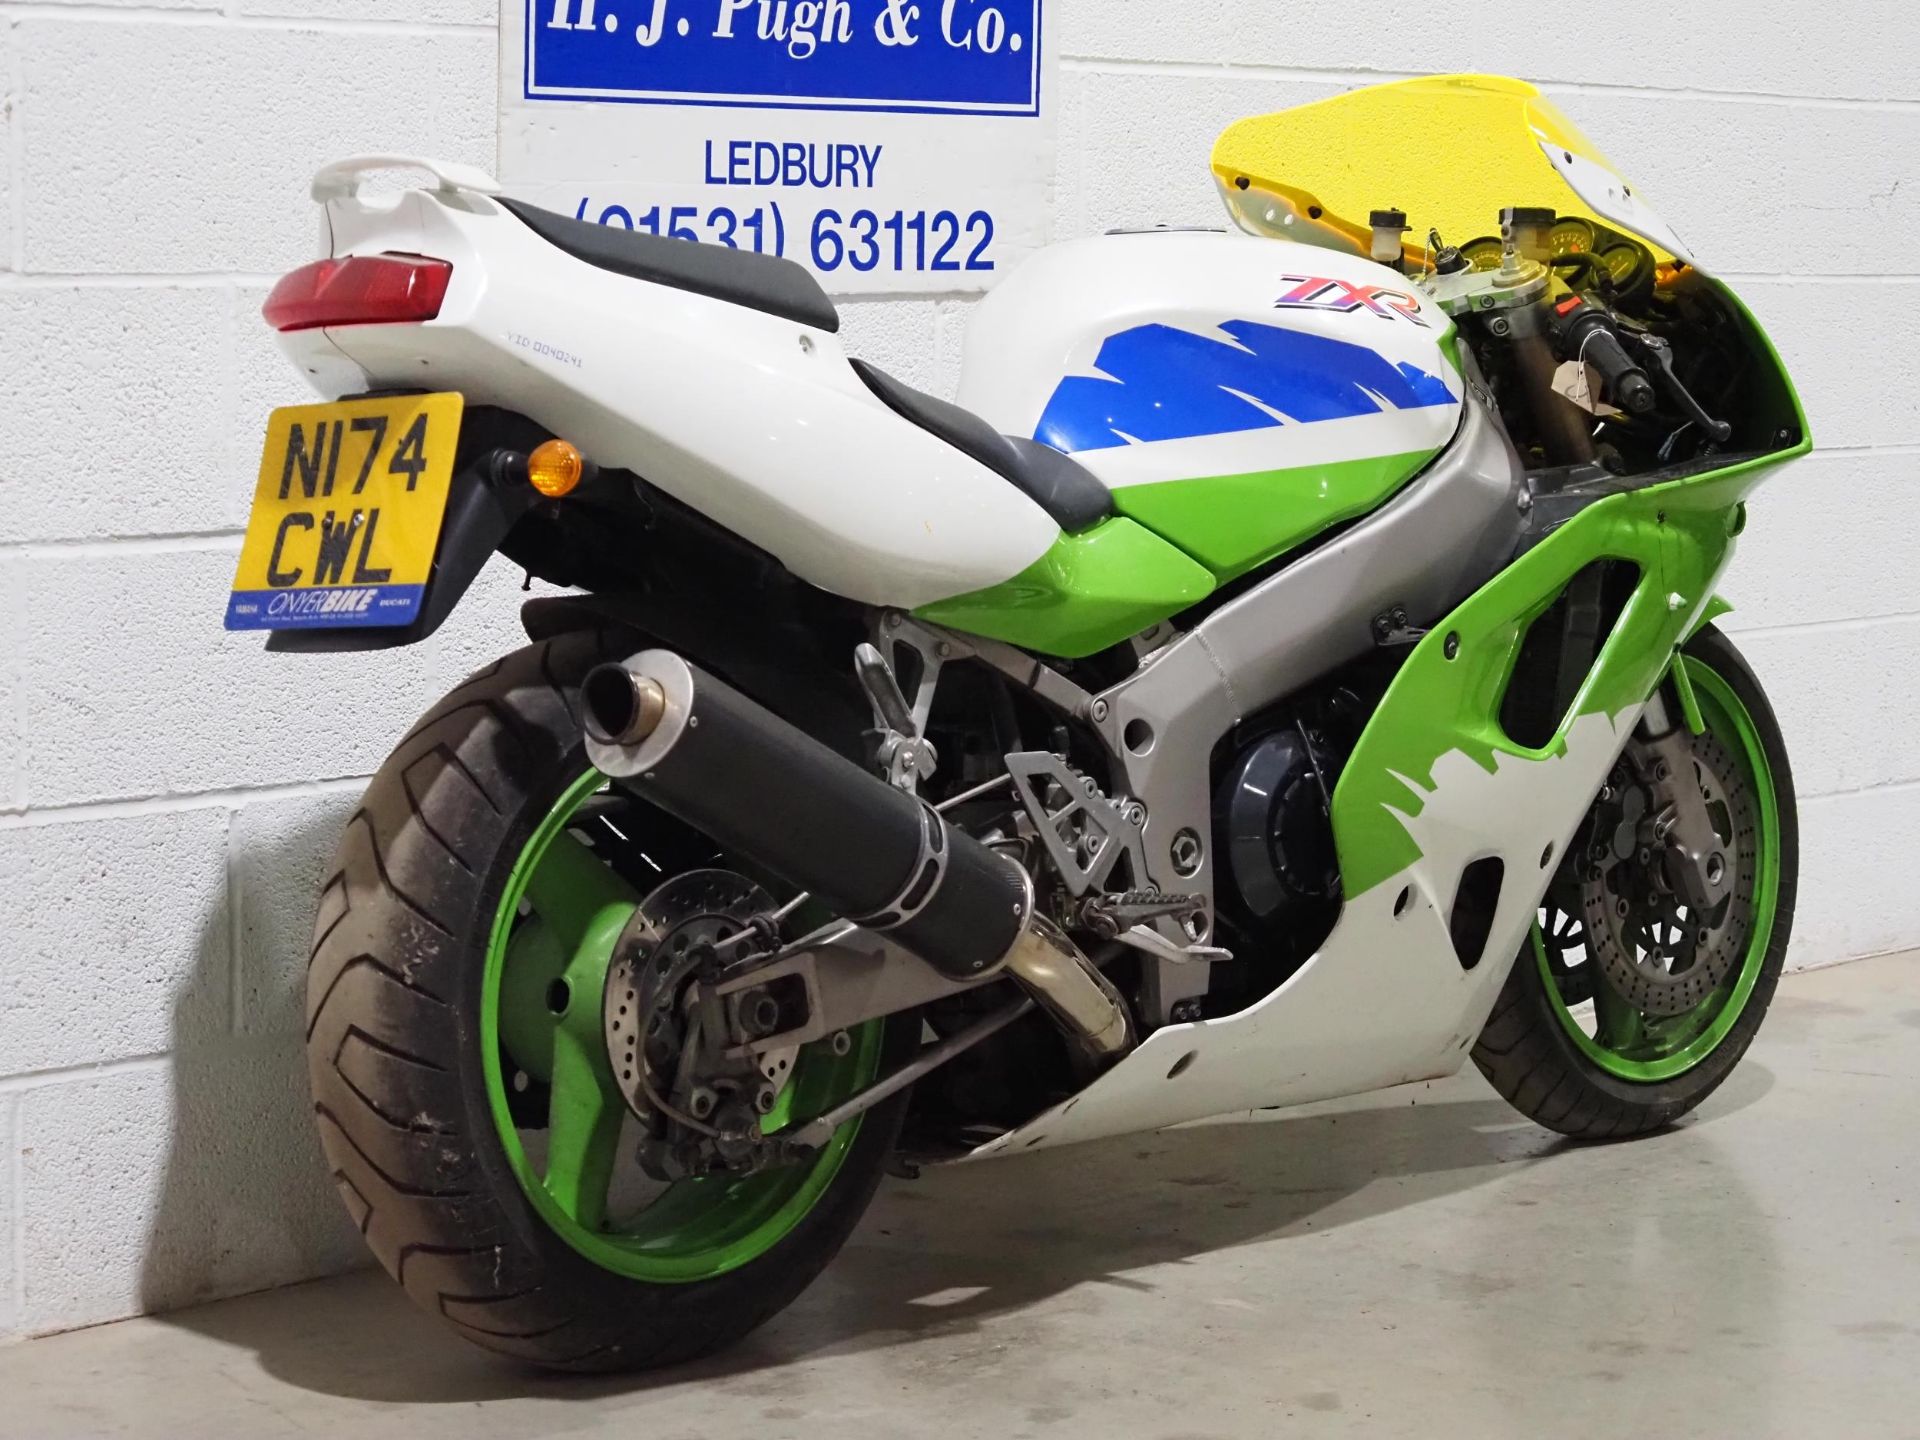 Kawasaki ZXR750 motorcycle. 1995. 749cc. Runs and rides. Fitted with carbon exhaust and stage 2 dyno - Bild 3 aus 6